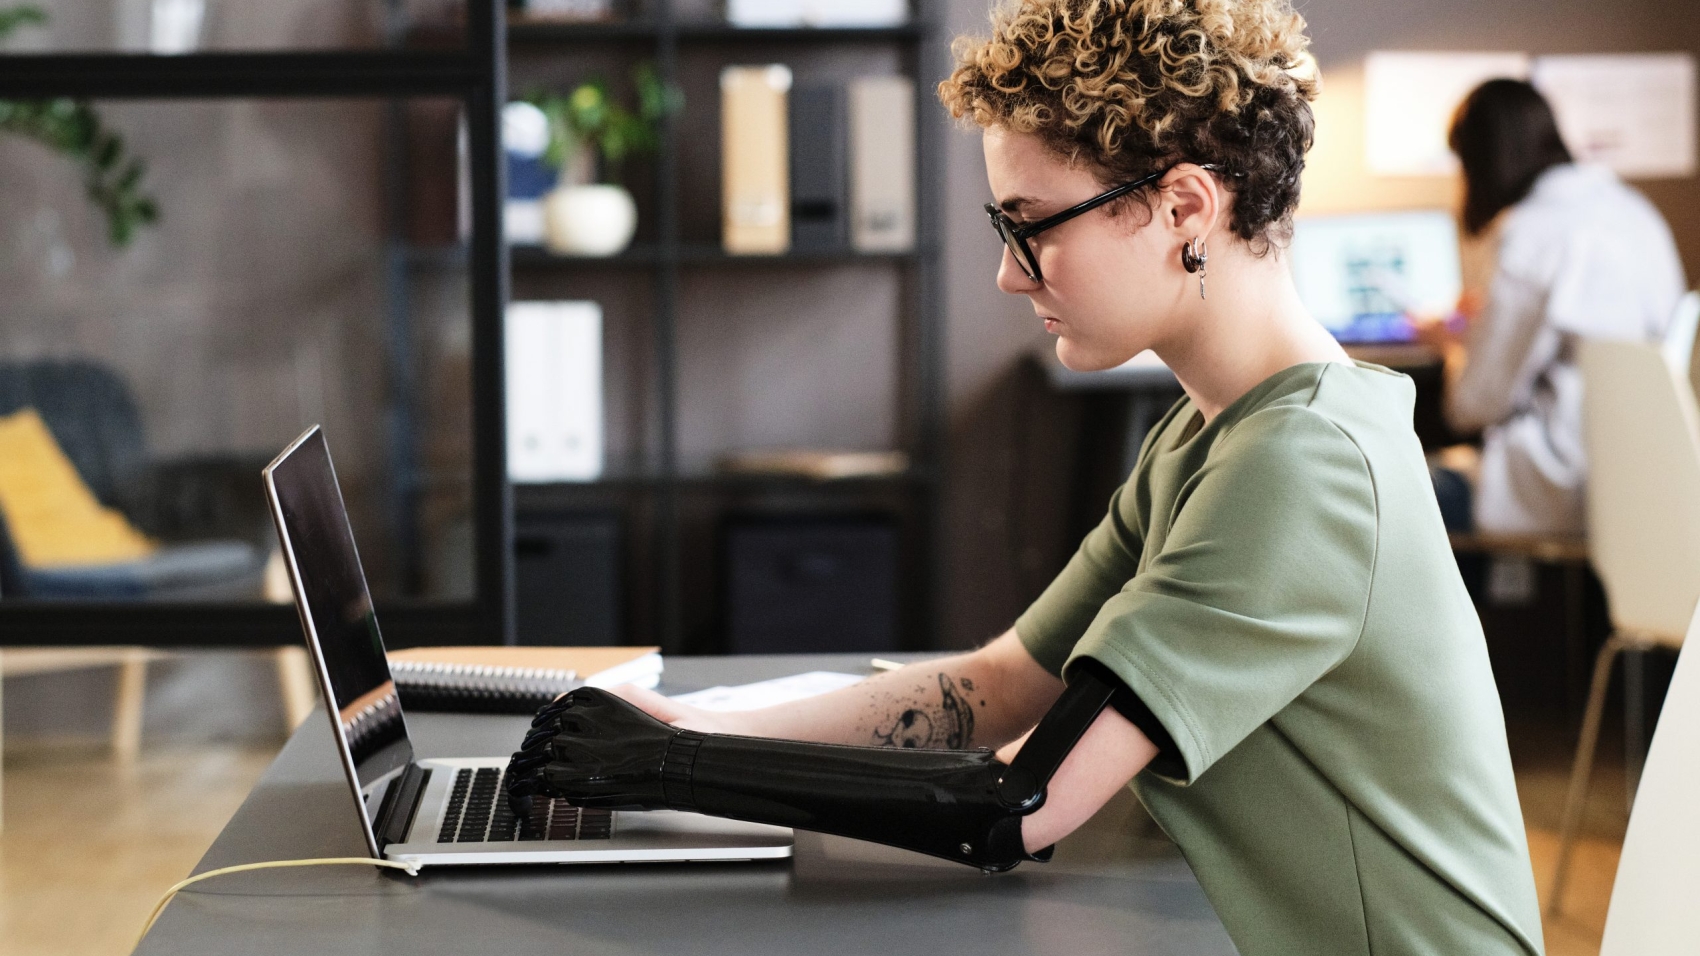 Young woman with prosthetic arm typing on laptop while sitting at office desk